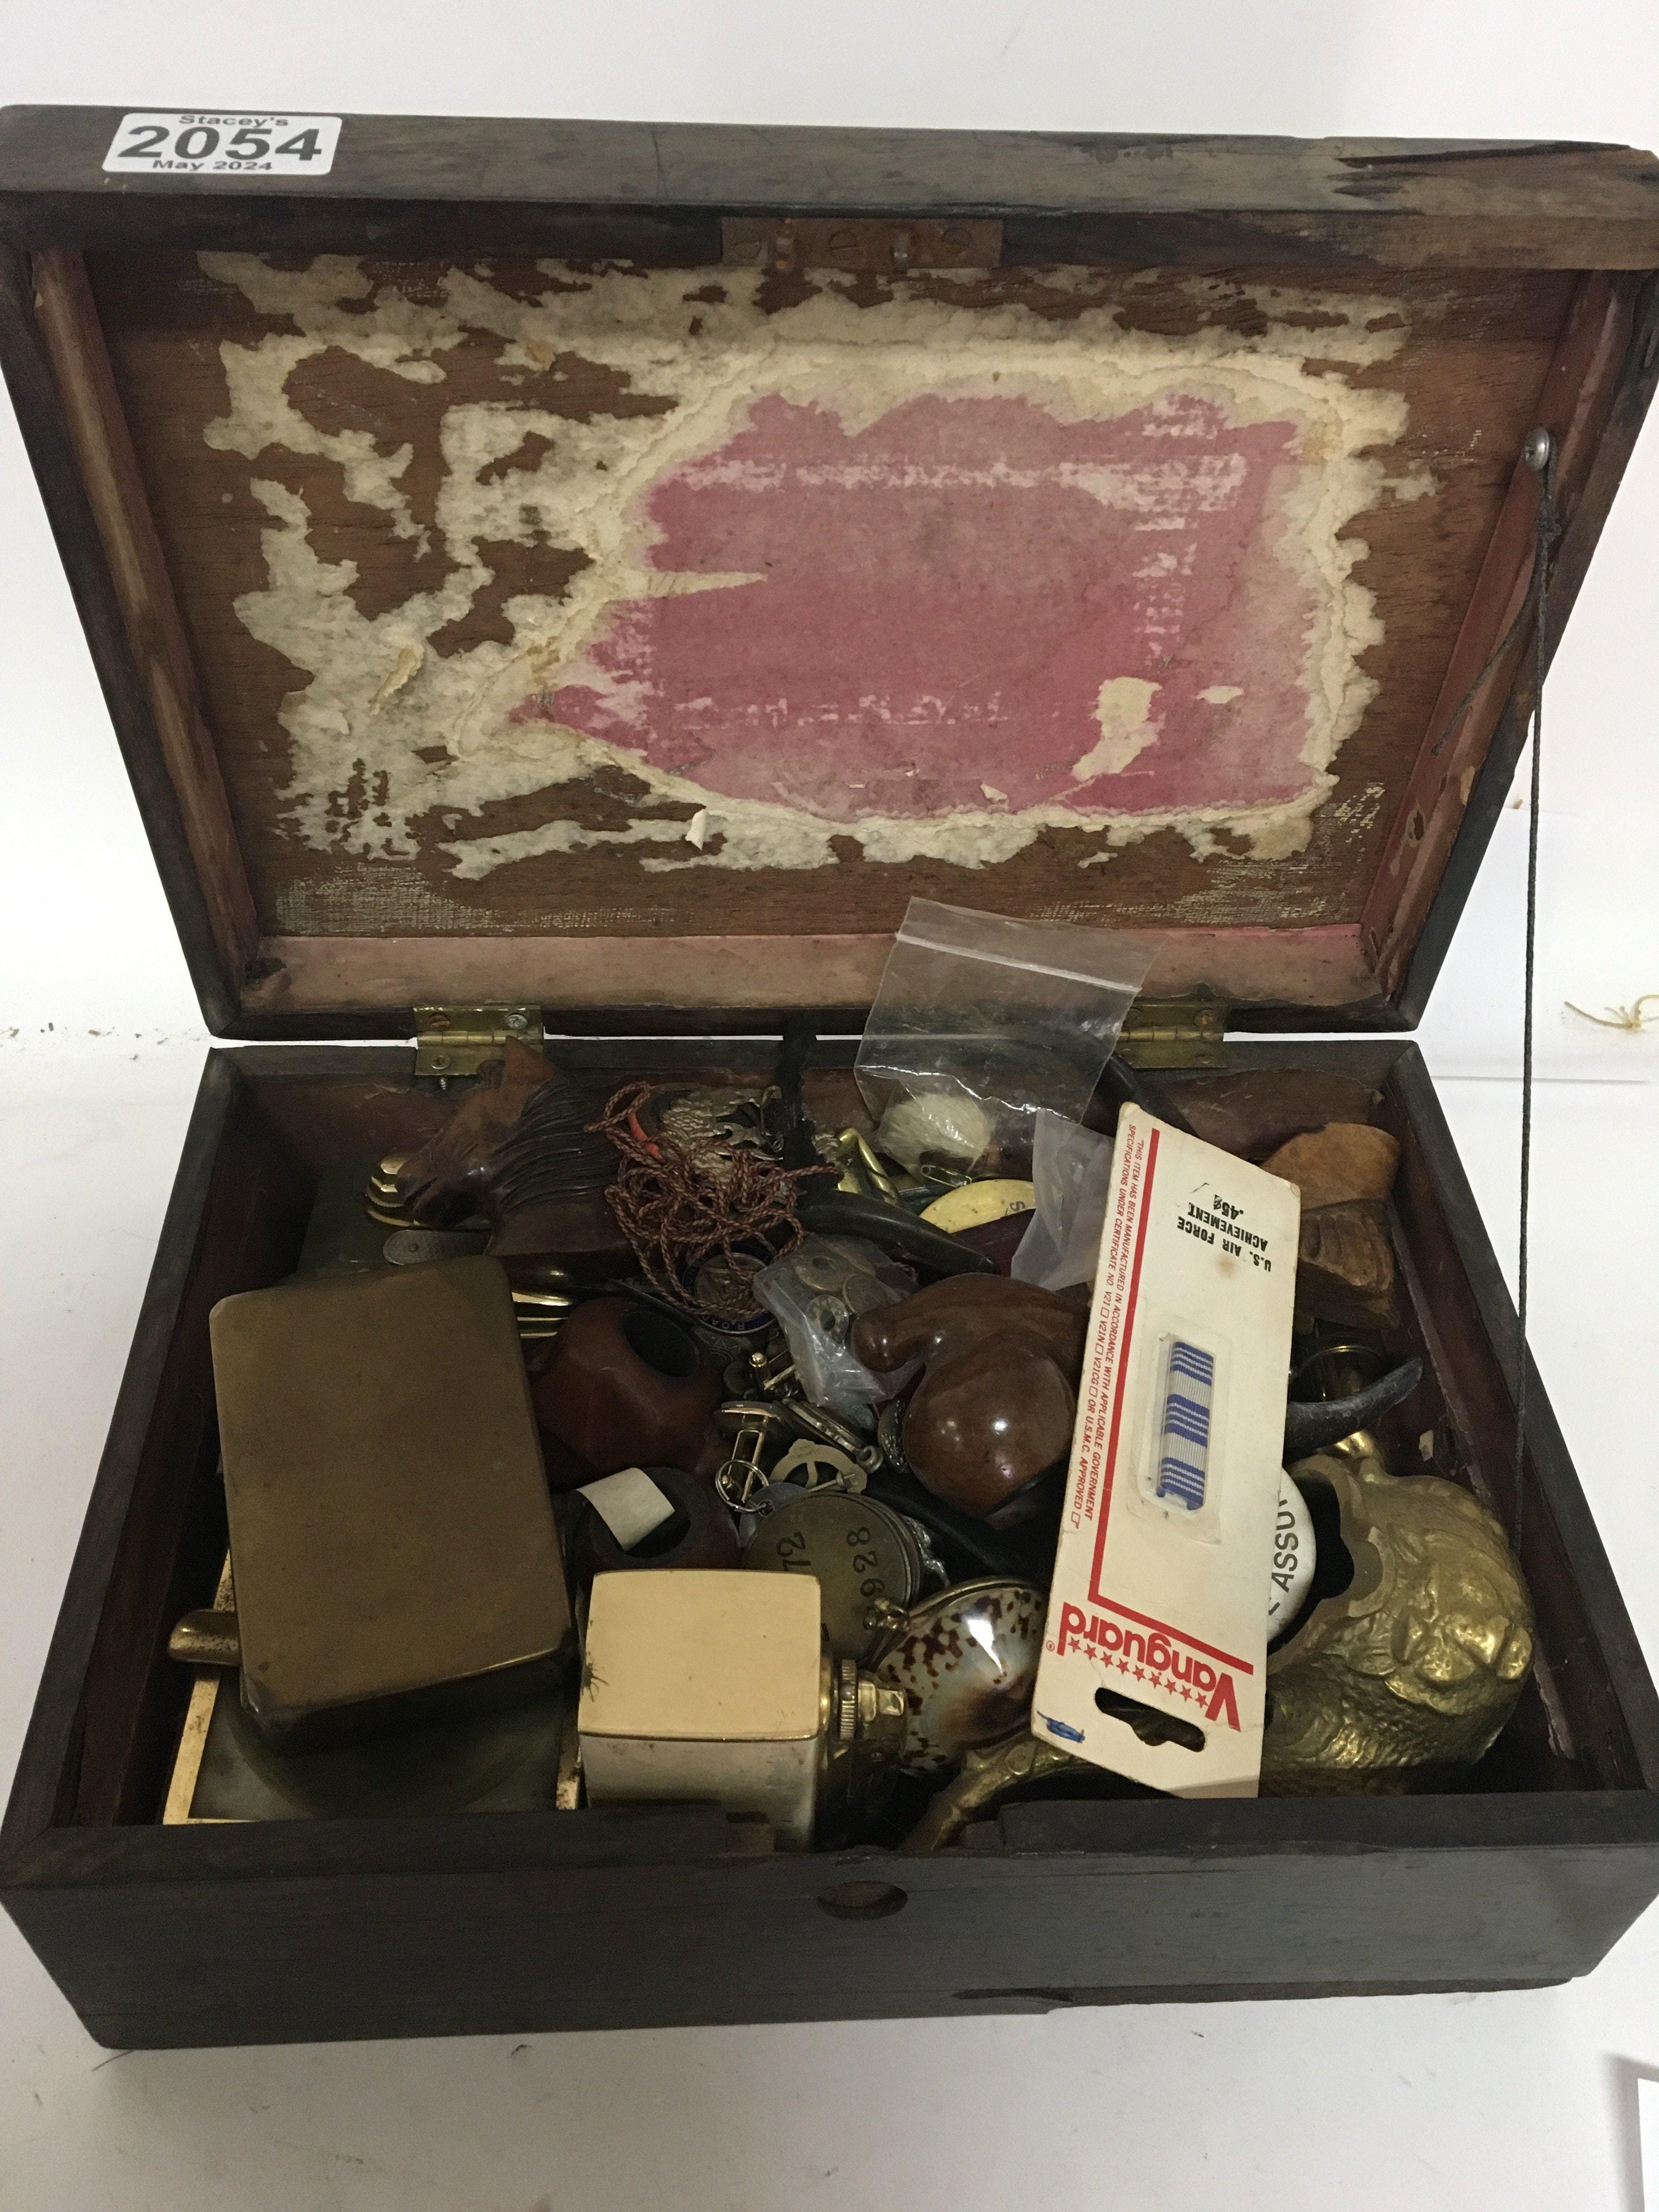 A box containing old smokers pipes lighters and ot